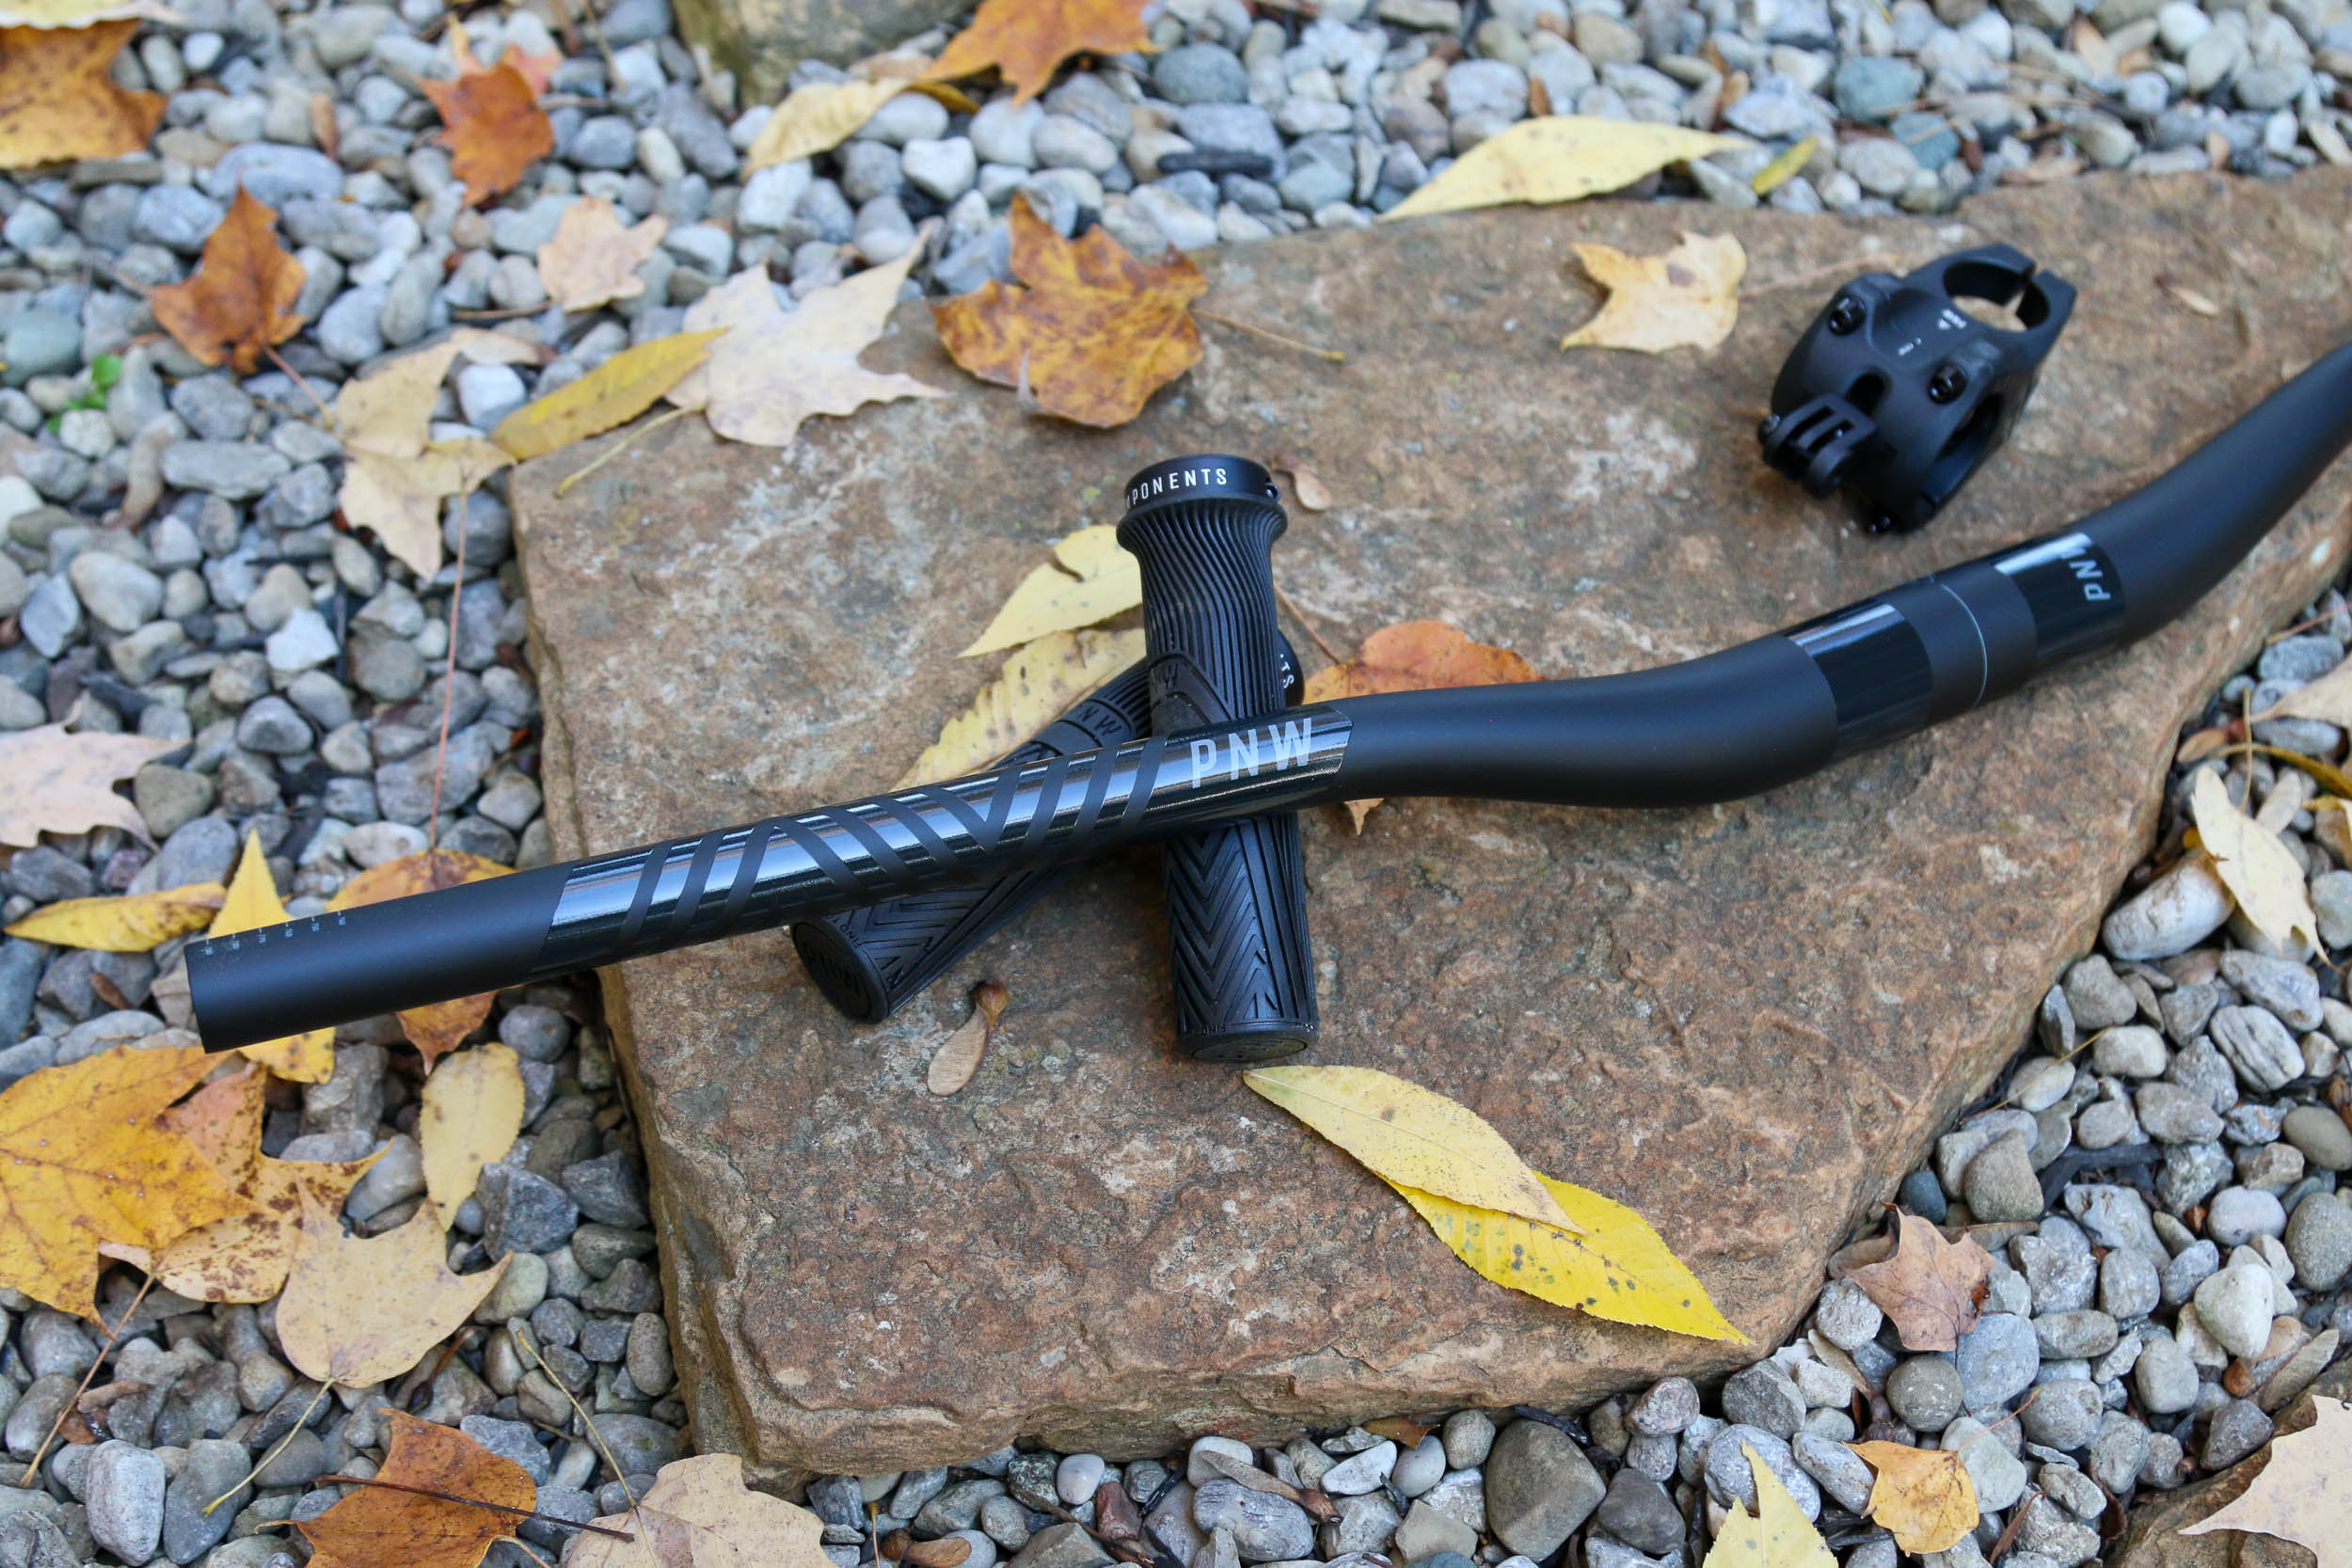 PNW Loam Carbon Handlebar Offers Predictable Comfort with CBD